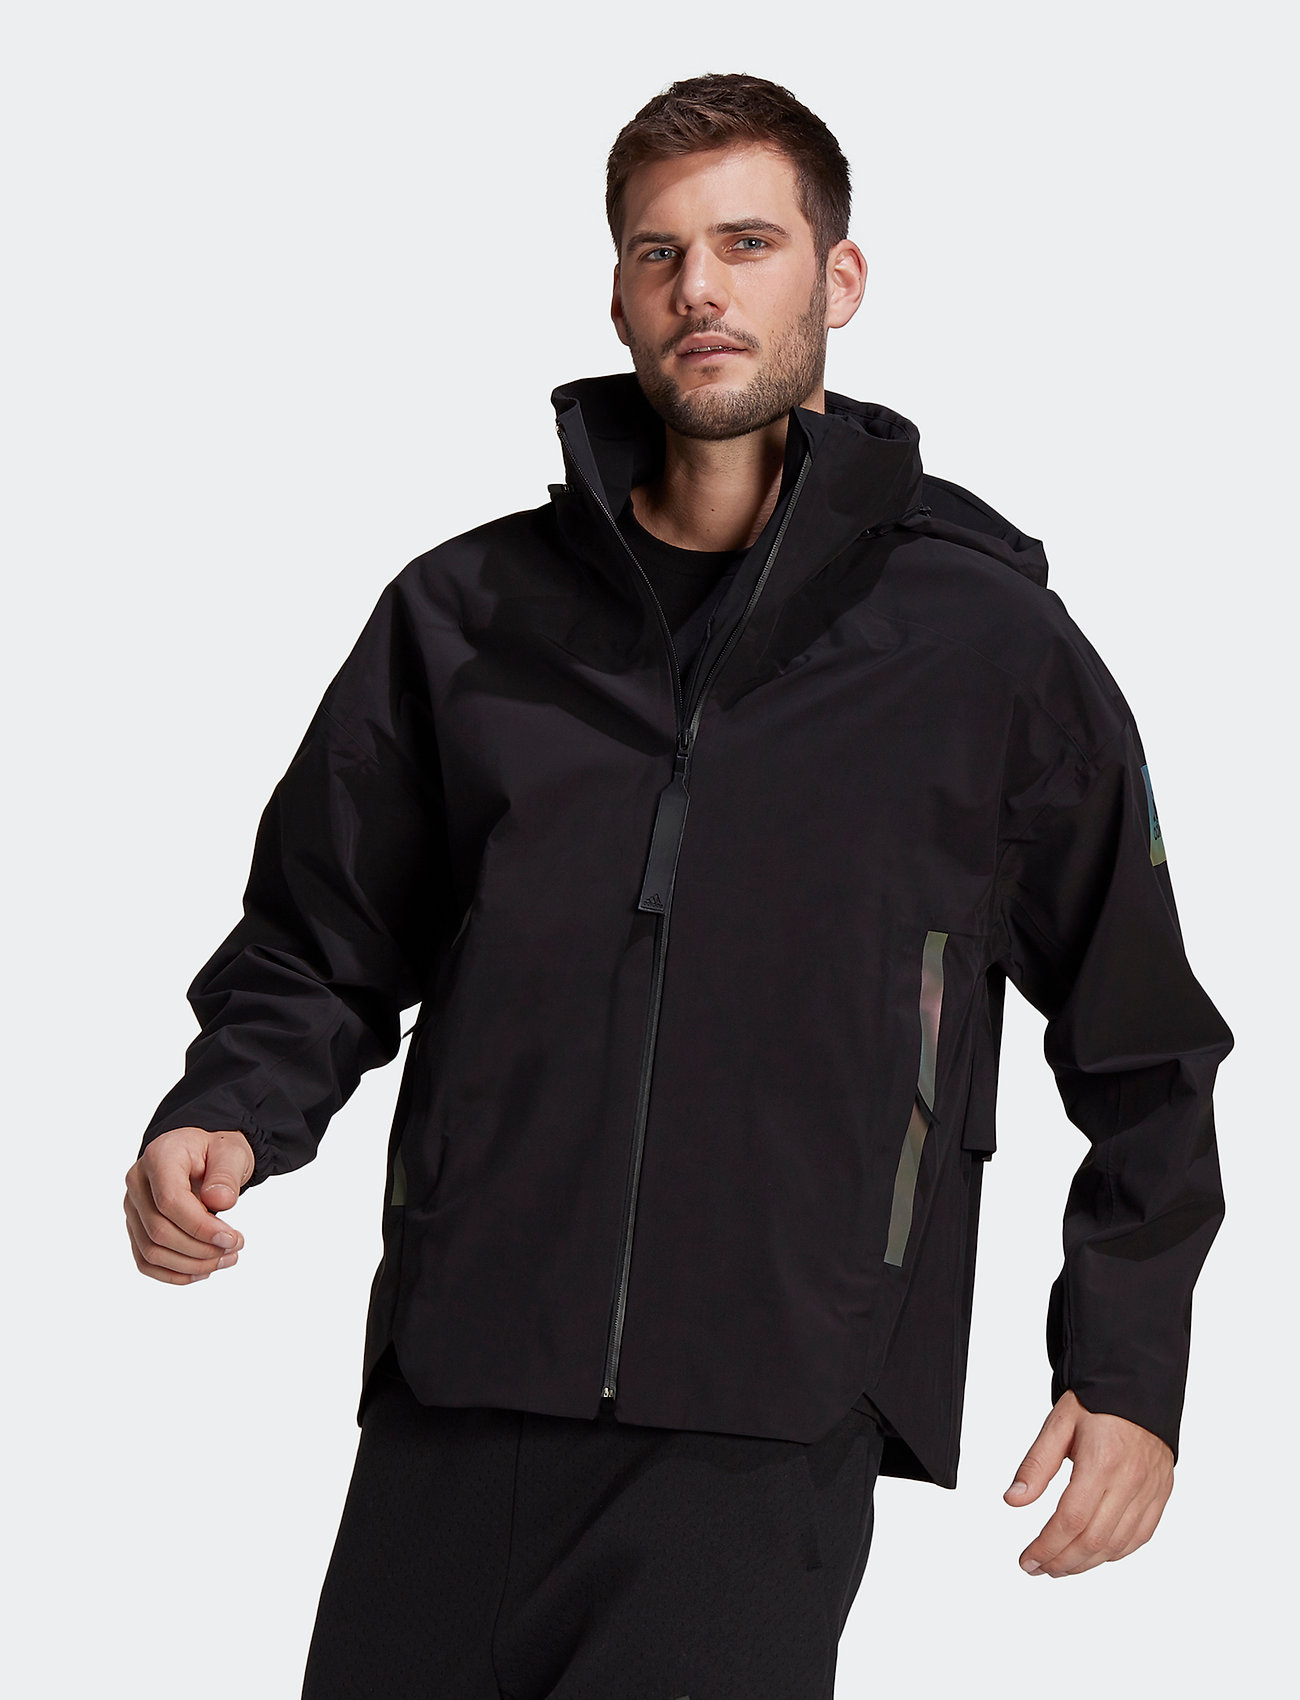 adidas Sportswear Myshelter Rain Jacket - 200 €. Buy Light Jackets from adidas Sportswear online at Boozt.com. Fast delivery and easy